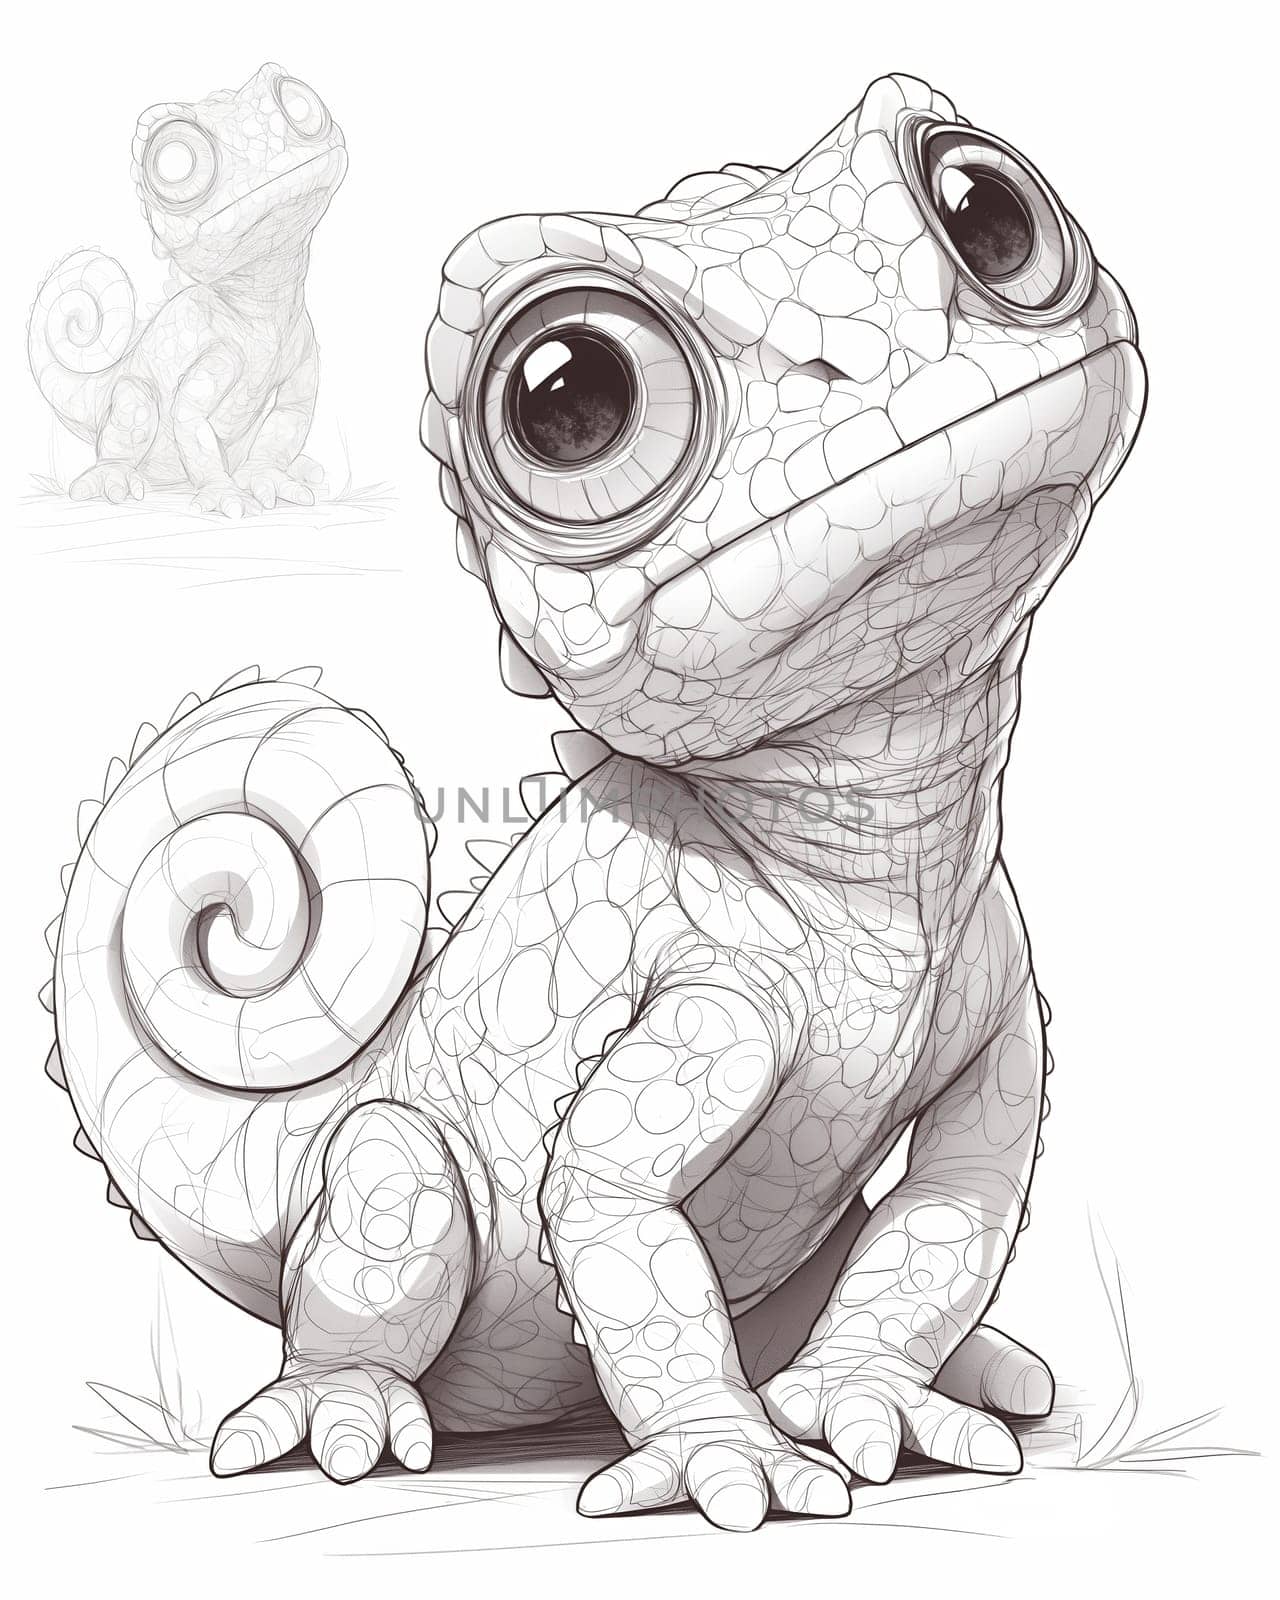 Coloring book for children, coloring animal, chameleon. by Fischeron